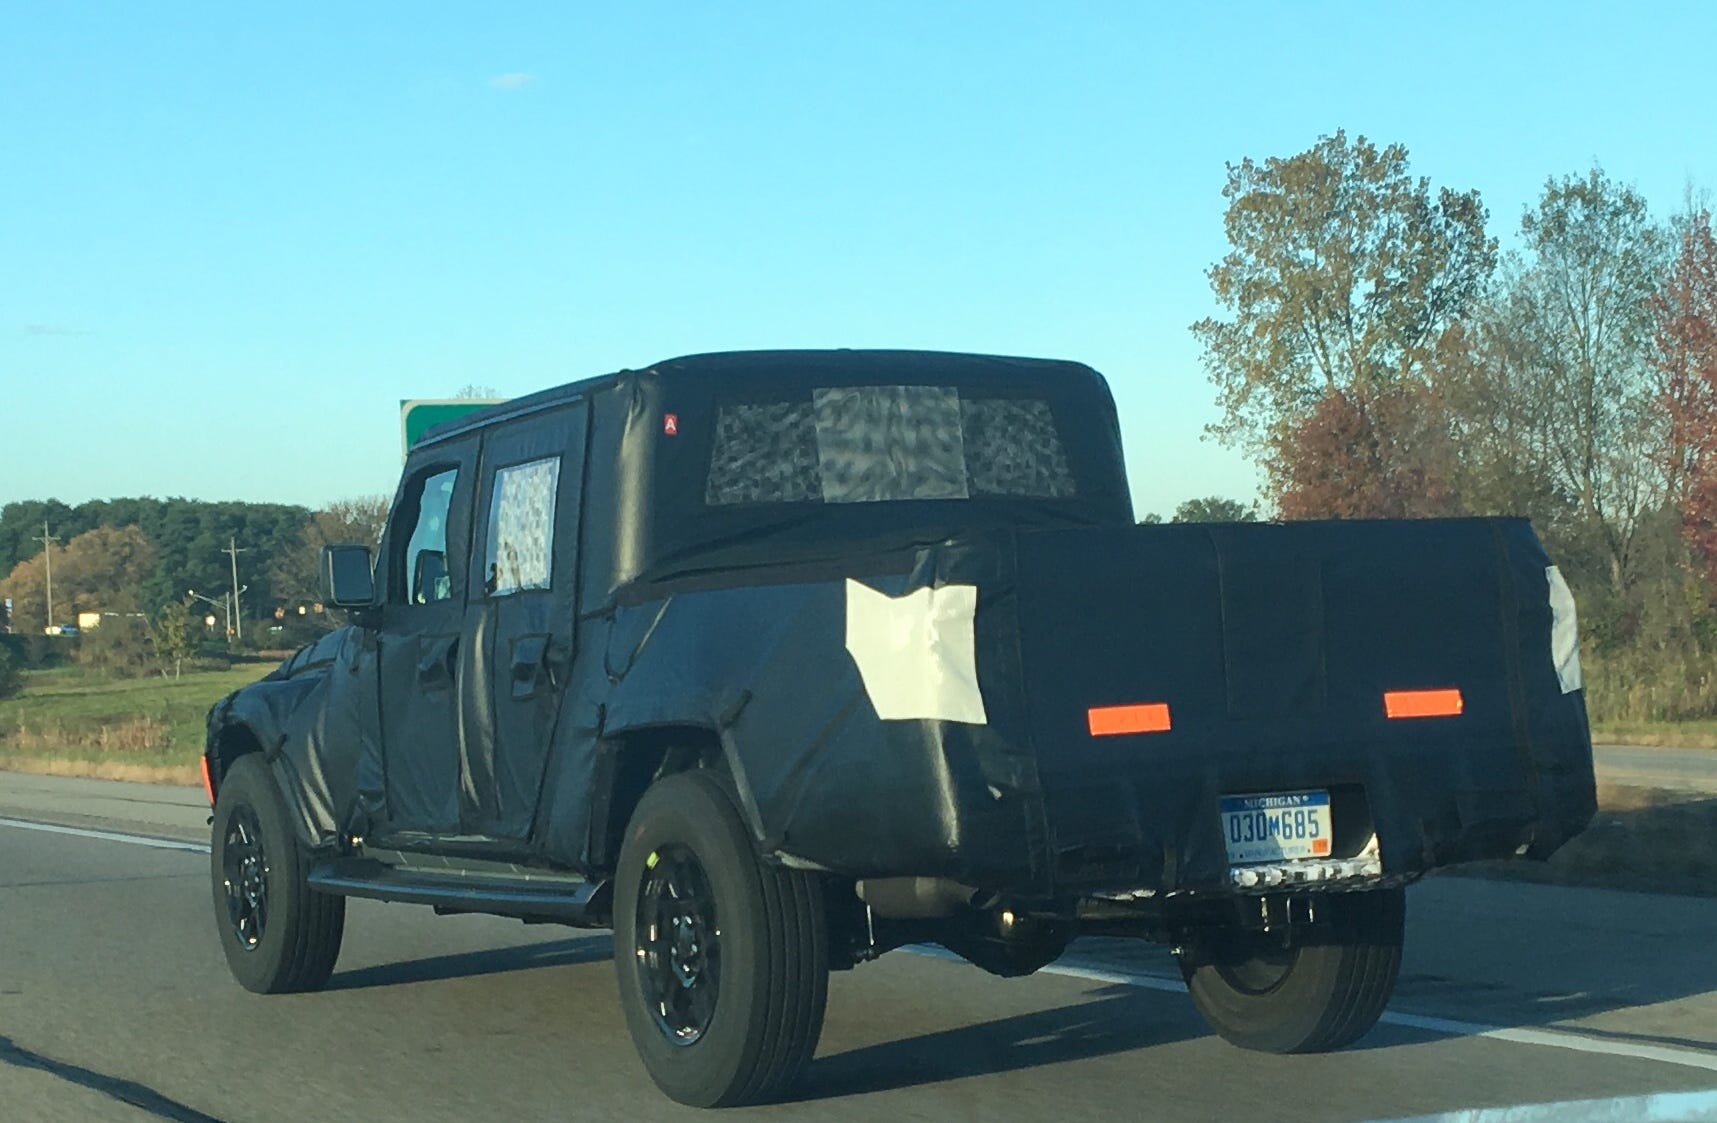 2020 Jeep Scrambler spotted on I-94 , to debut in LA